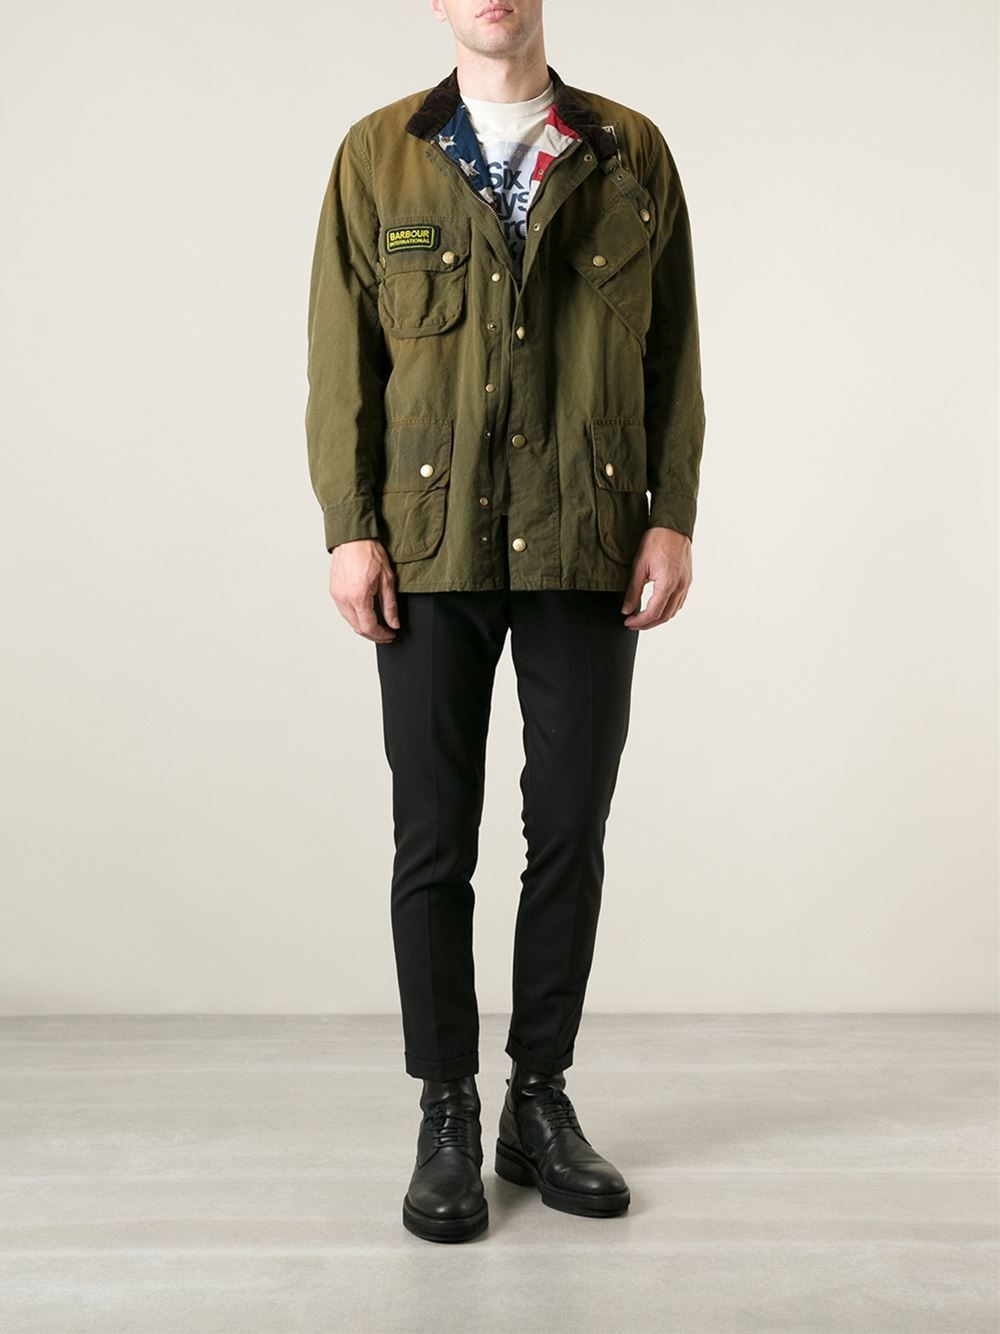 Barbour 'Washington' Waxed Jacket in Green for Men - Lyst